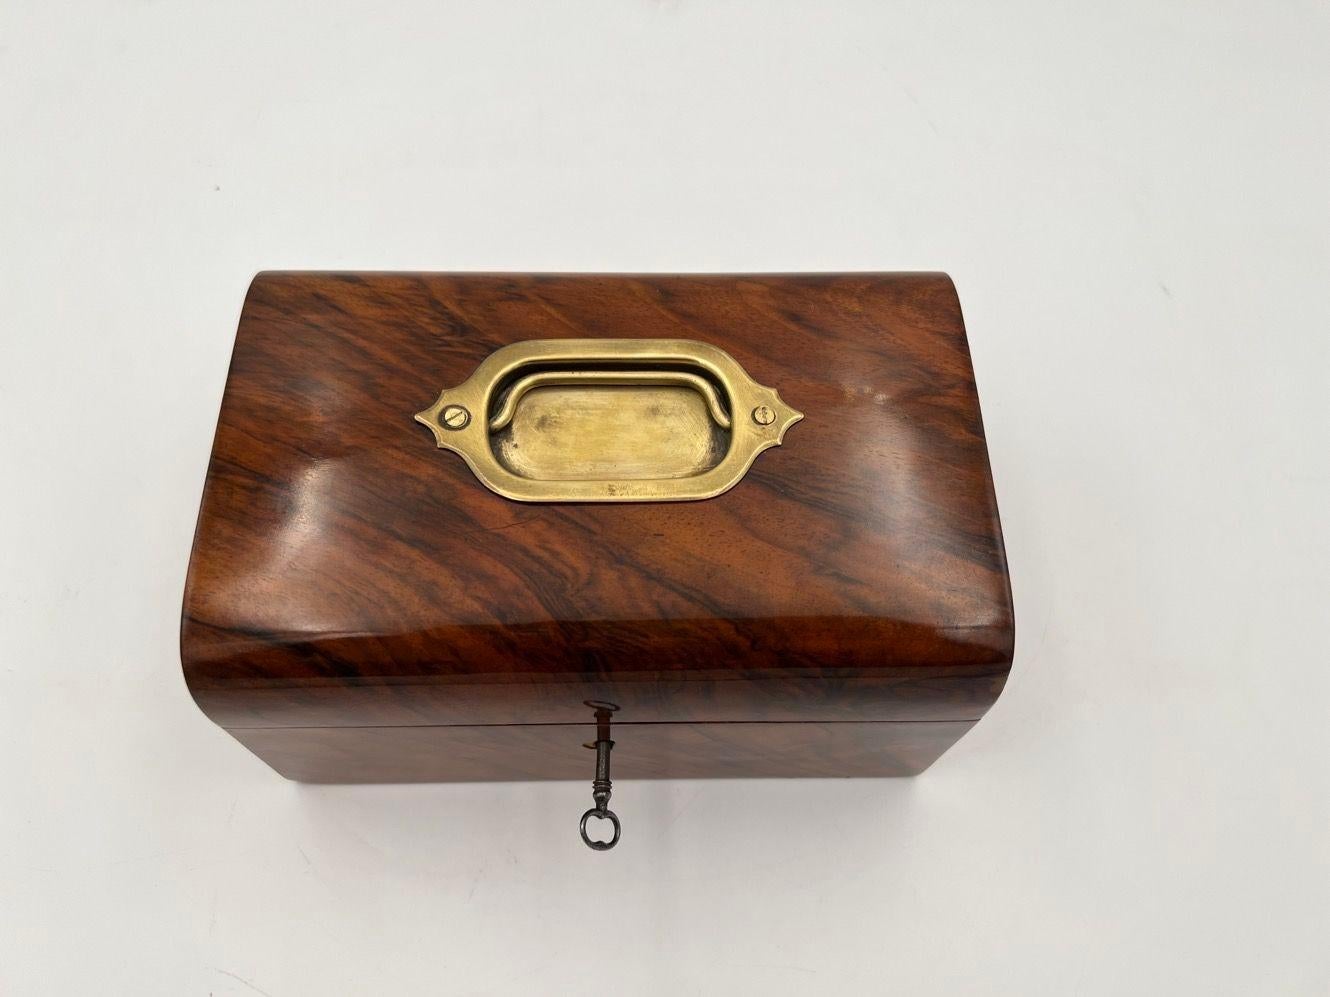 Polished Antique Decorative Box, Walnut Veneer and Brass, South Germany, circa 1850 For Sale